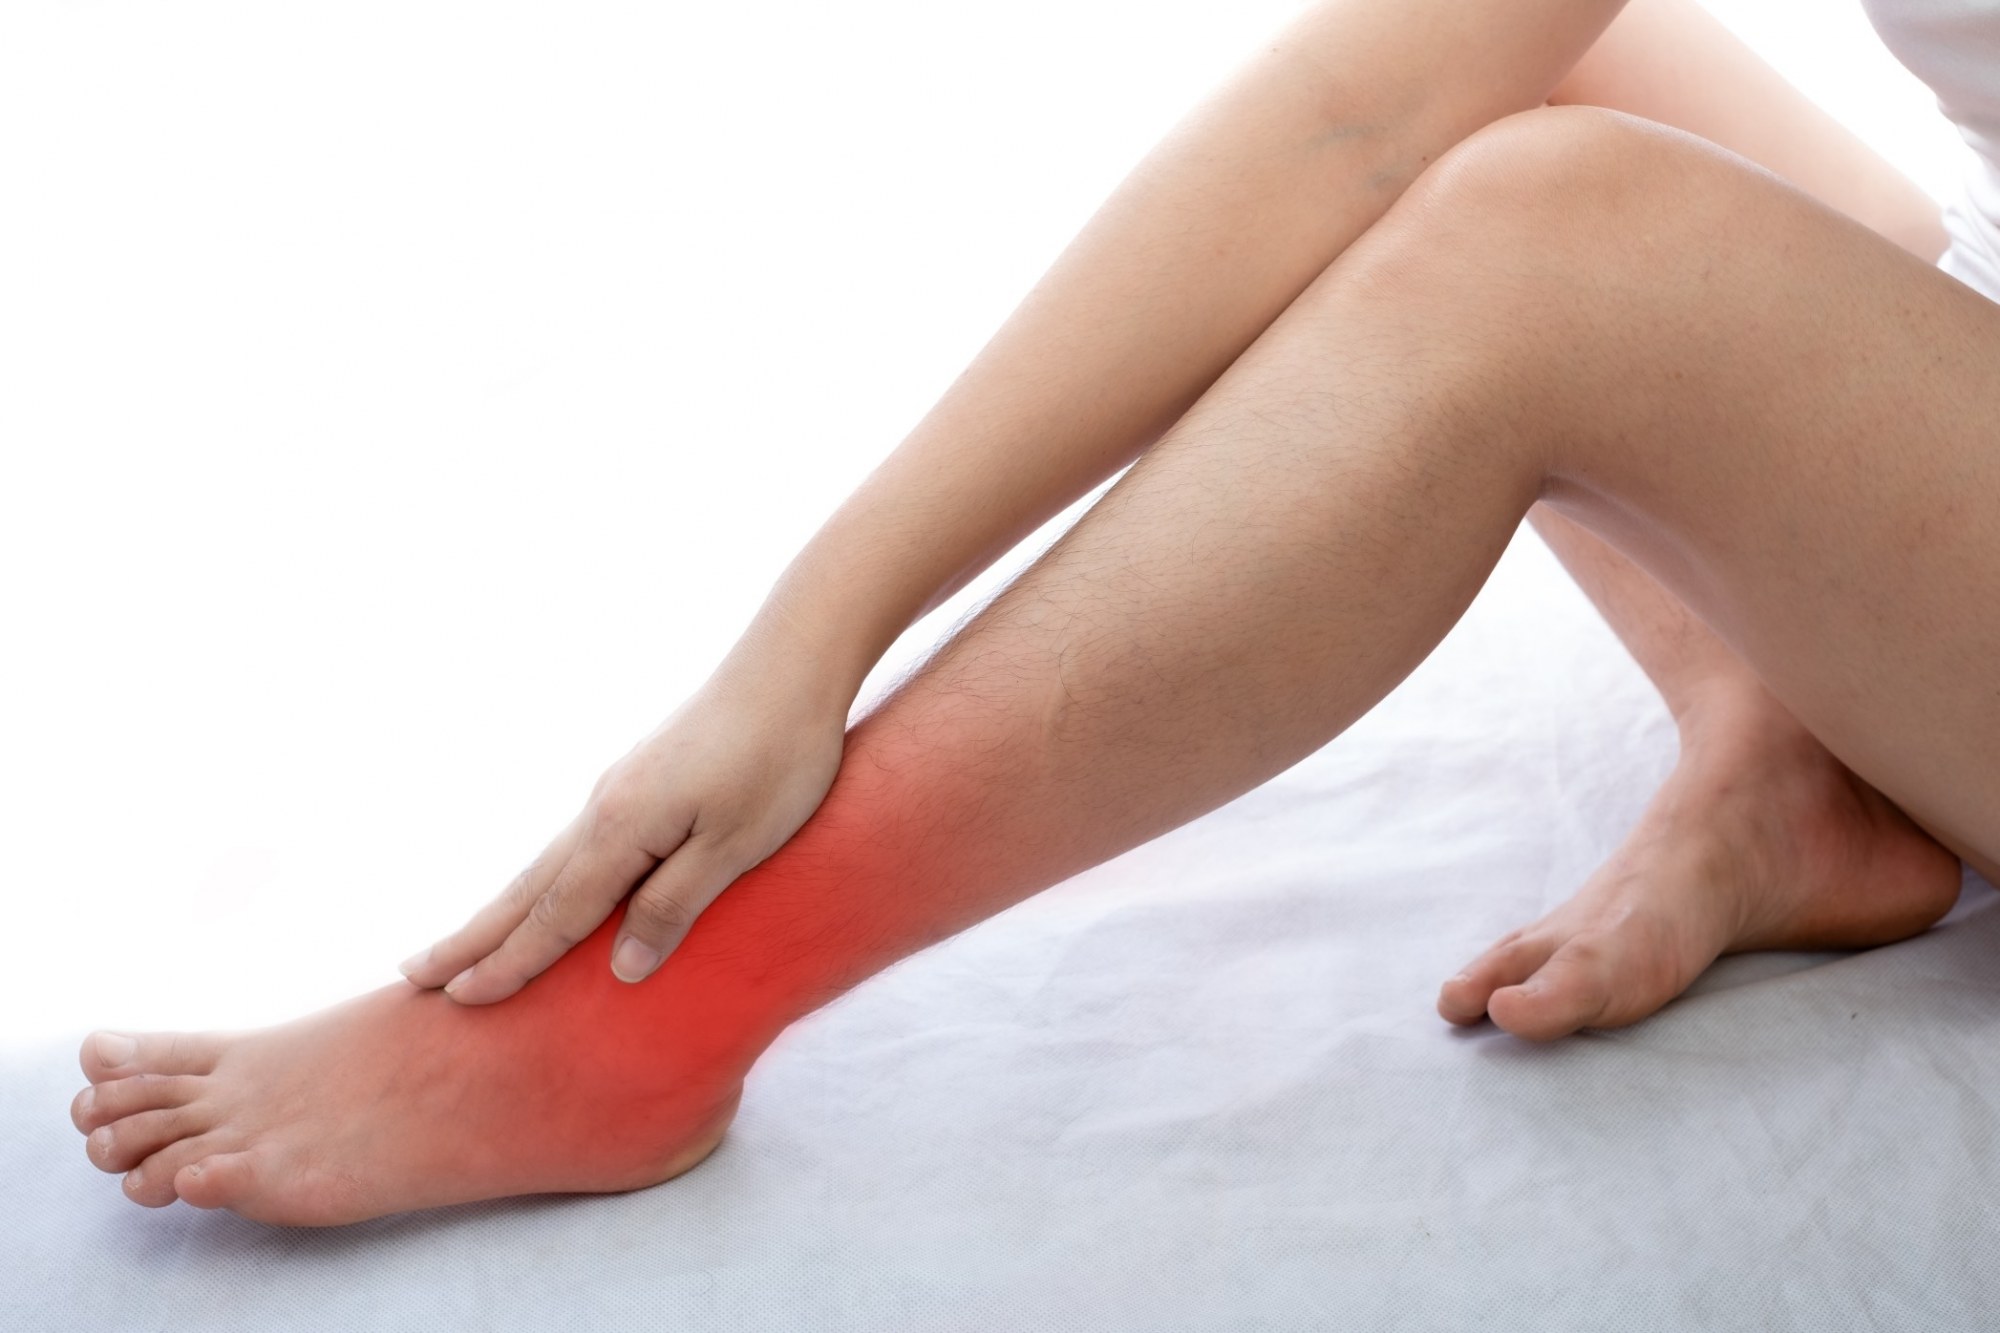 Jersey Foot & Ankle Institute - Treatment for Plantar Fasciitis is just a  phone call away!😇 It is one of the most common causes of heel pain.  Symptoms include stabbing pain in